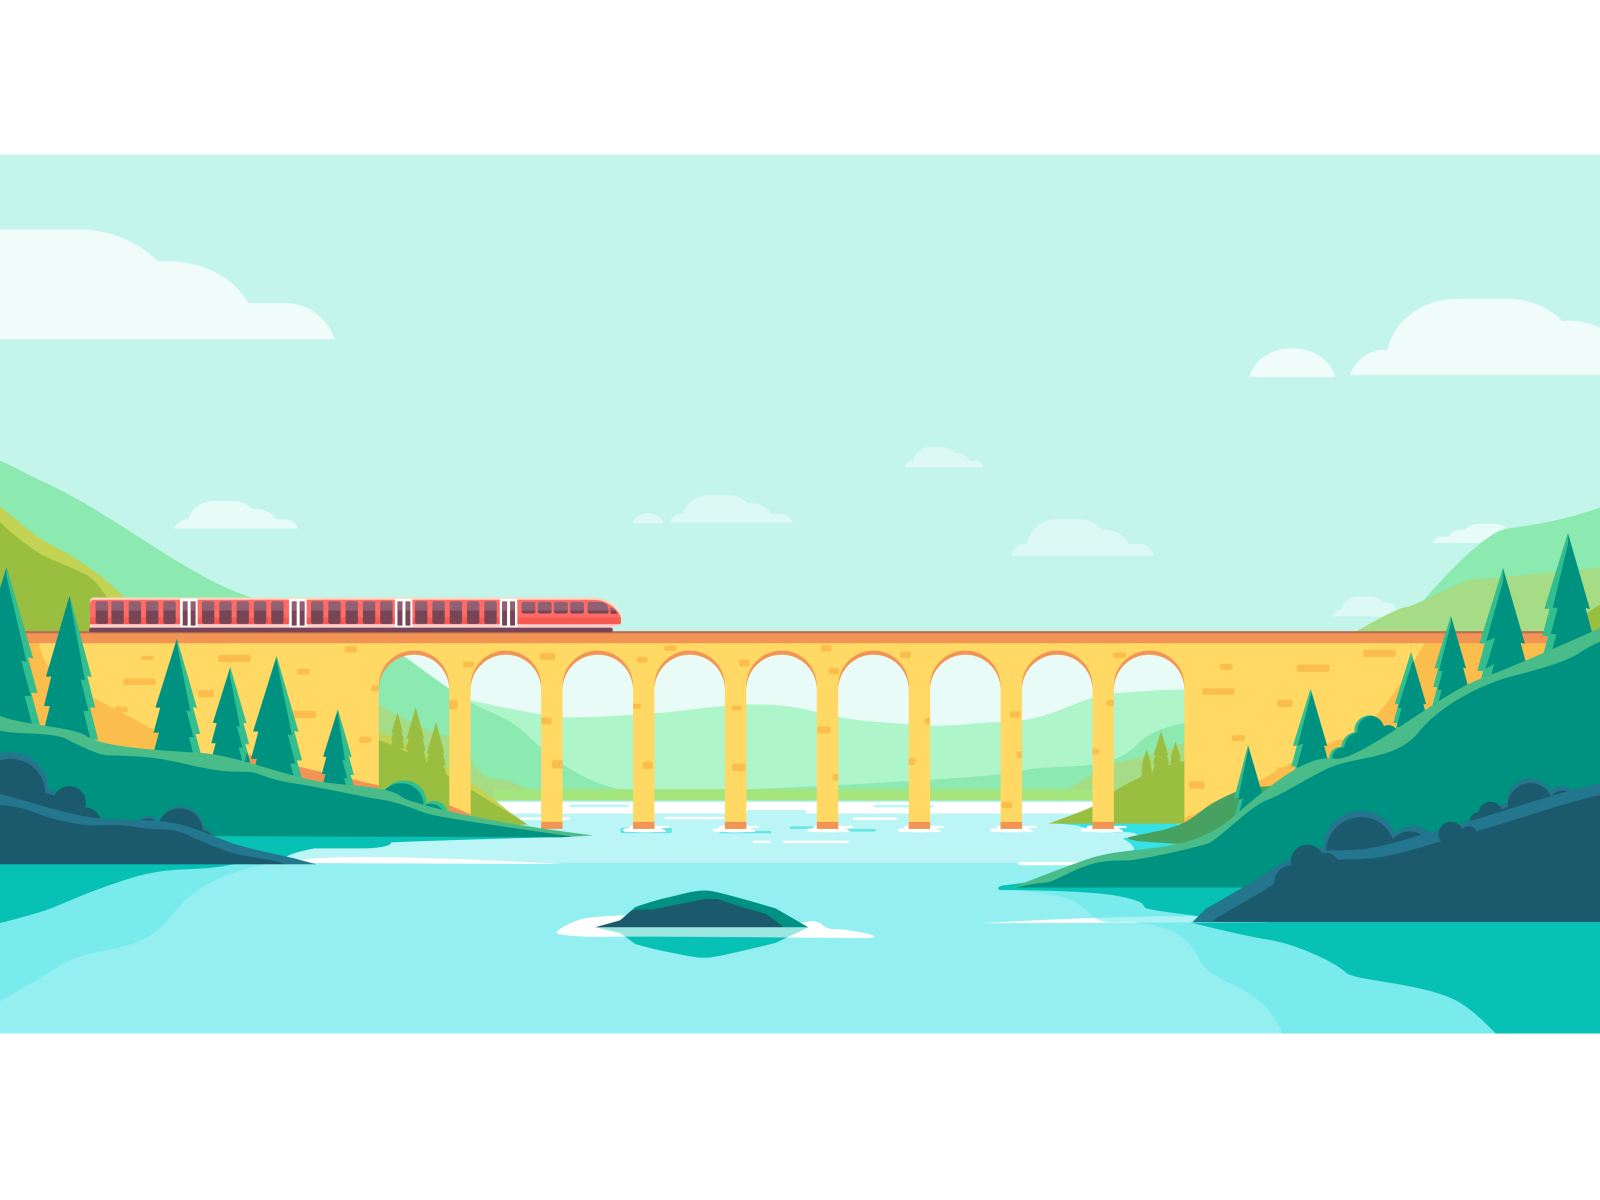 Vector illustration of trains crossing a river over the railroad by